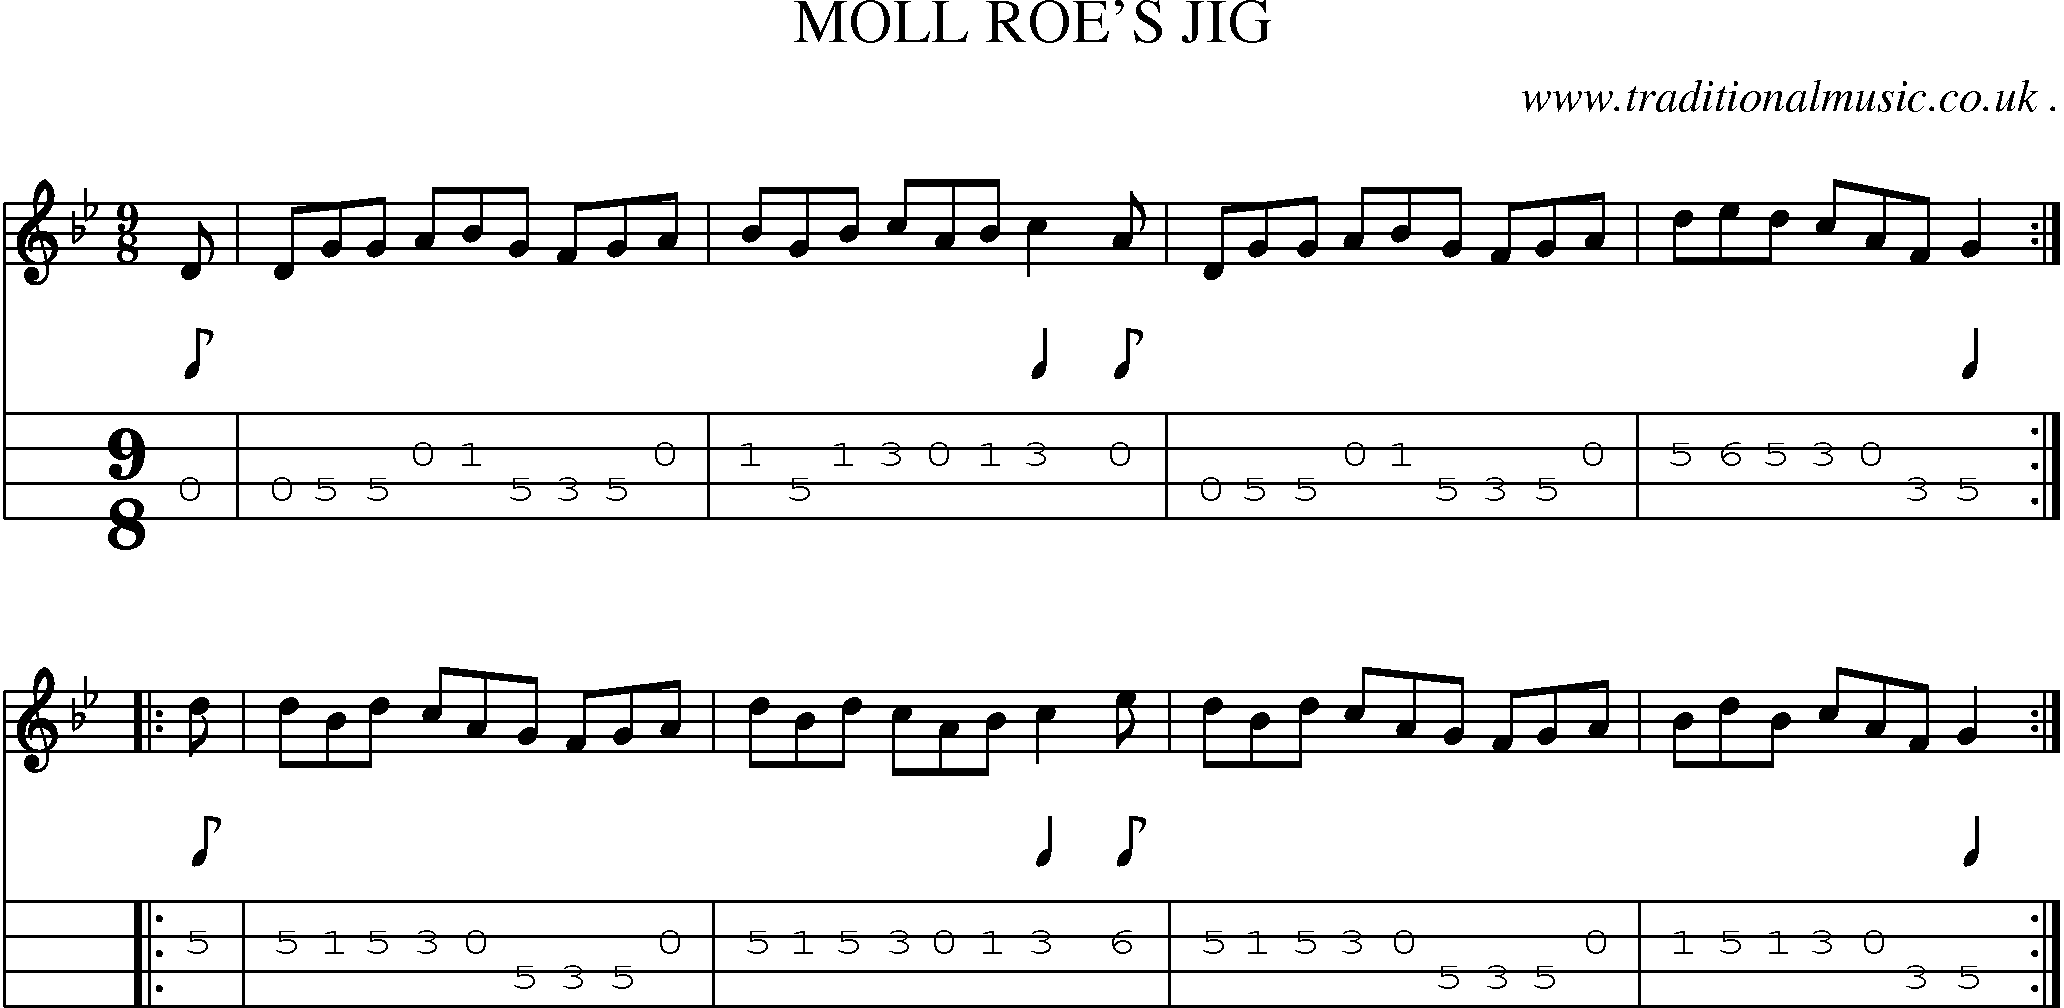 Sheet-Music and Mandolin Tabs for Moll Roes Jig